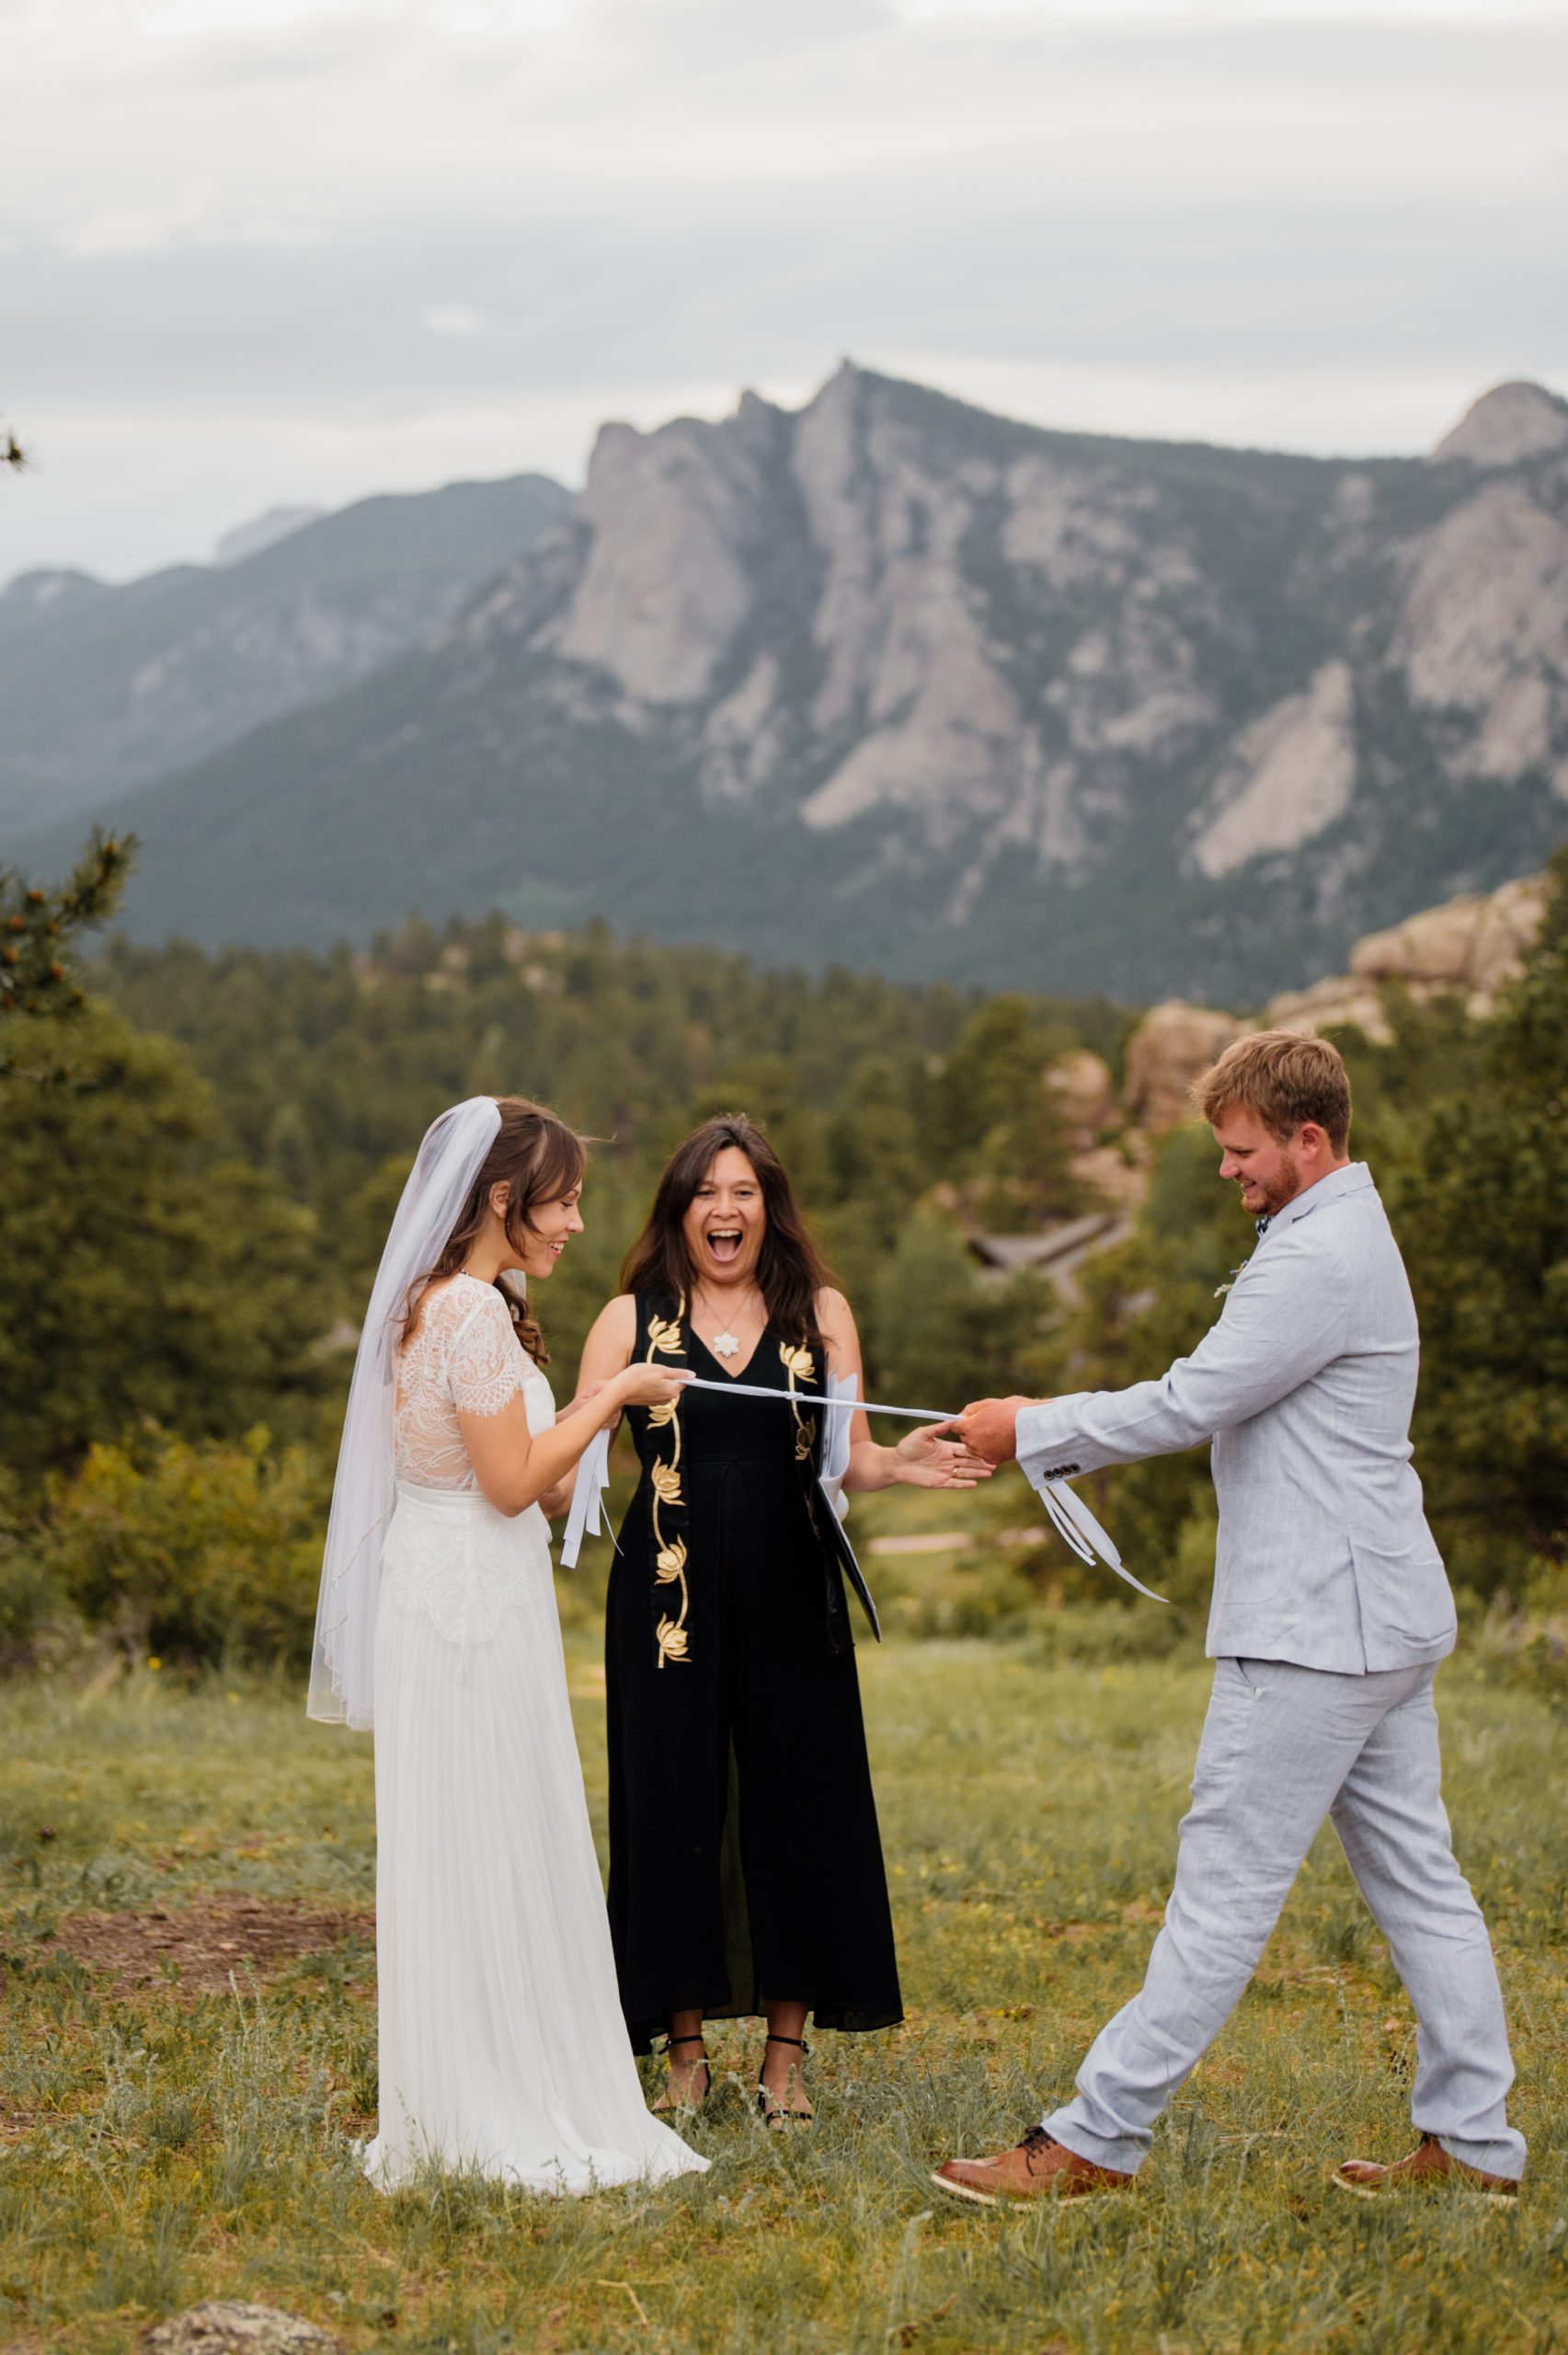 The couple pulls the rope  from their hand-fasting ceremony during their elopement ceremony at Knoll Willows in Estes Park.